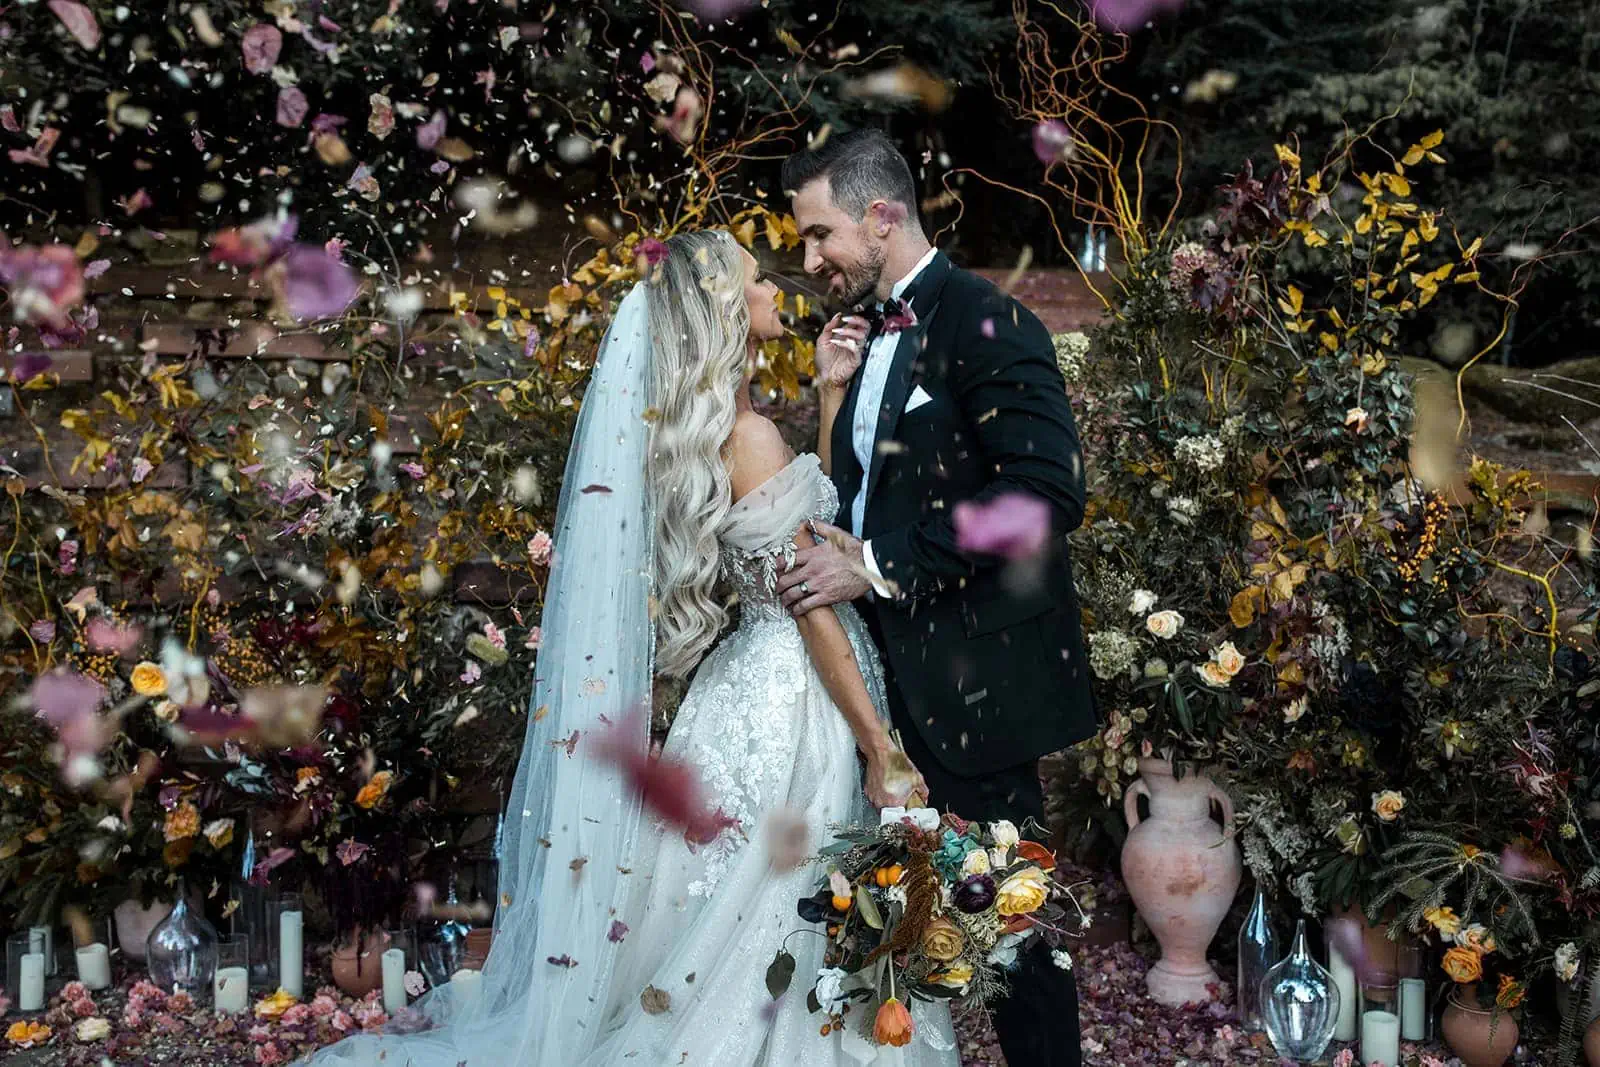 A bride and groom stand together as flower petals float around them in the Northern California breeze.